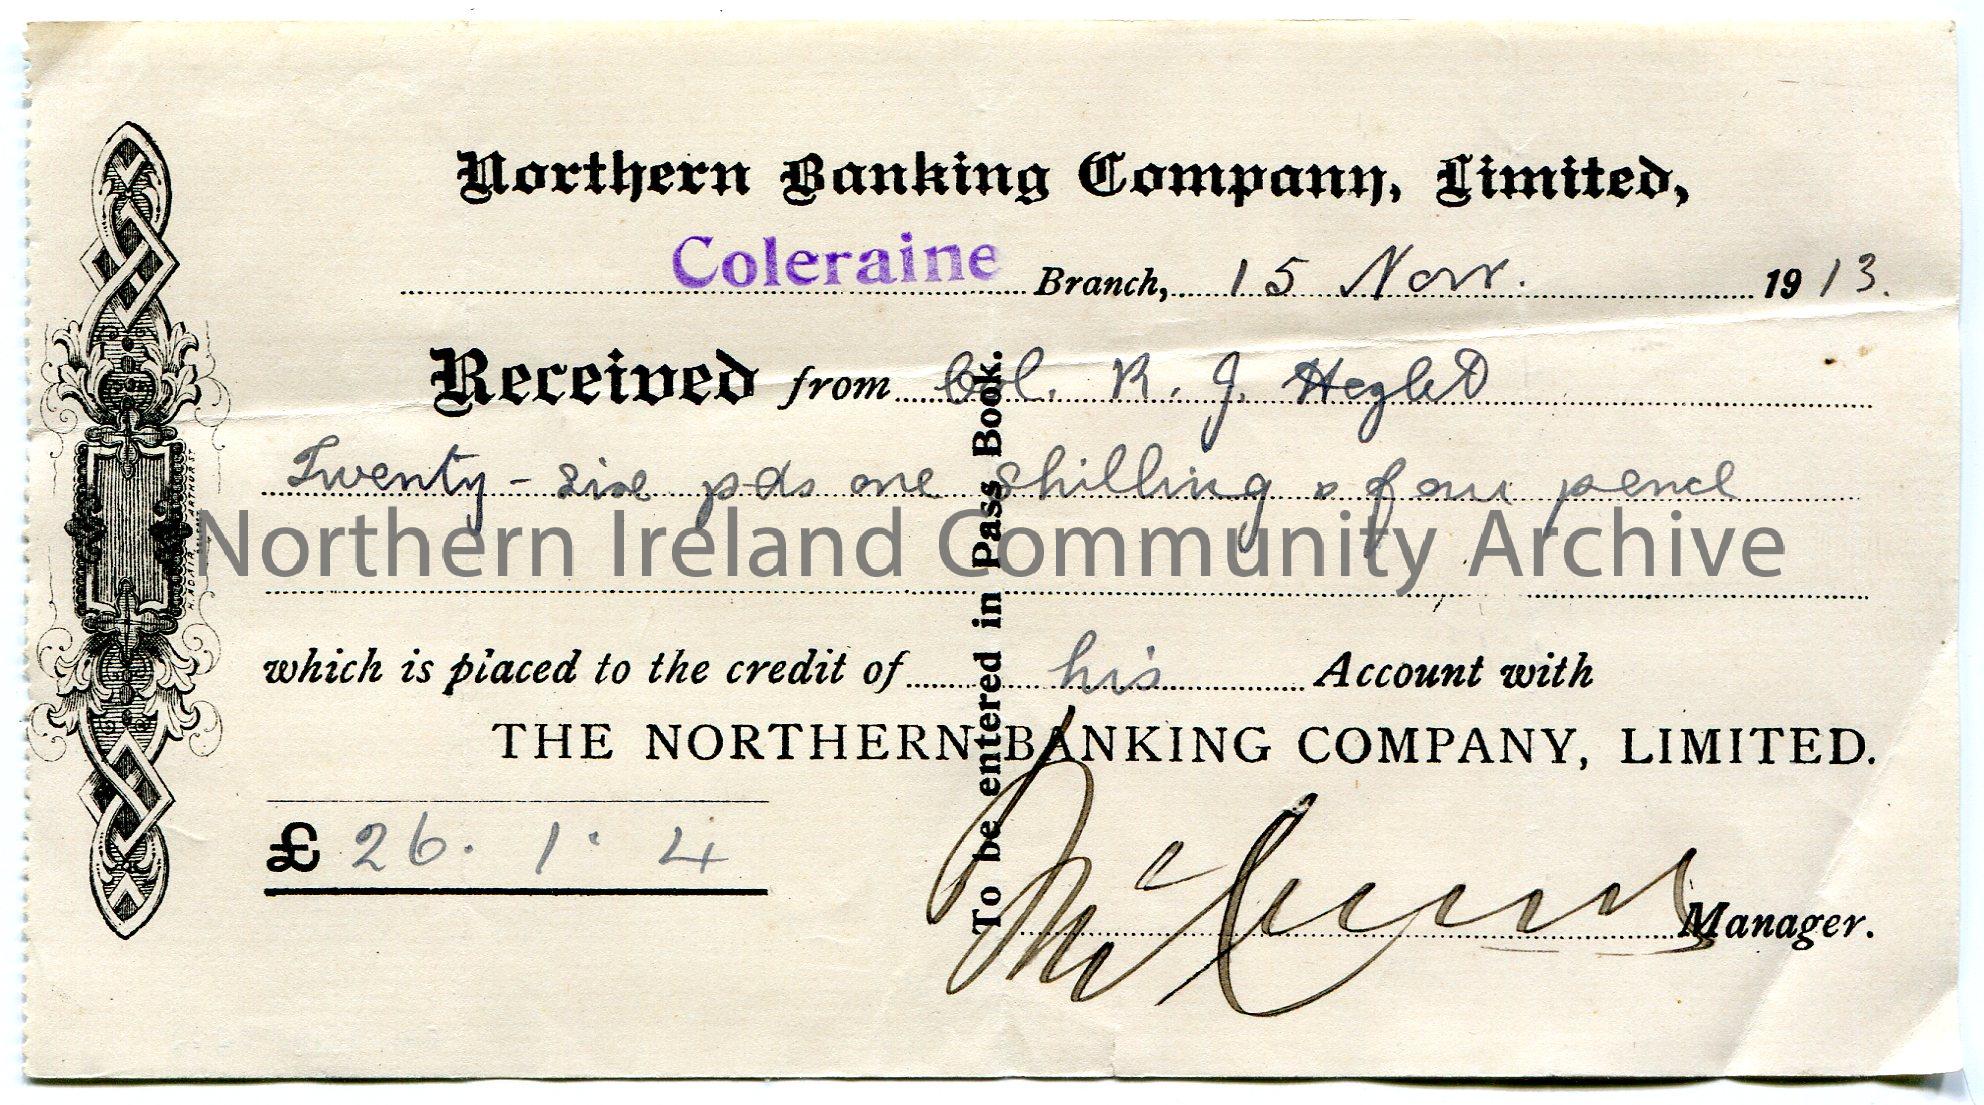 Handwritten receipt from the Northern Banking Company, Limited, Coleraine branch for credit of £26.1.4 into the bank account of Col. R. J. Hezlet…